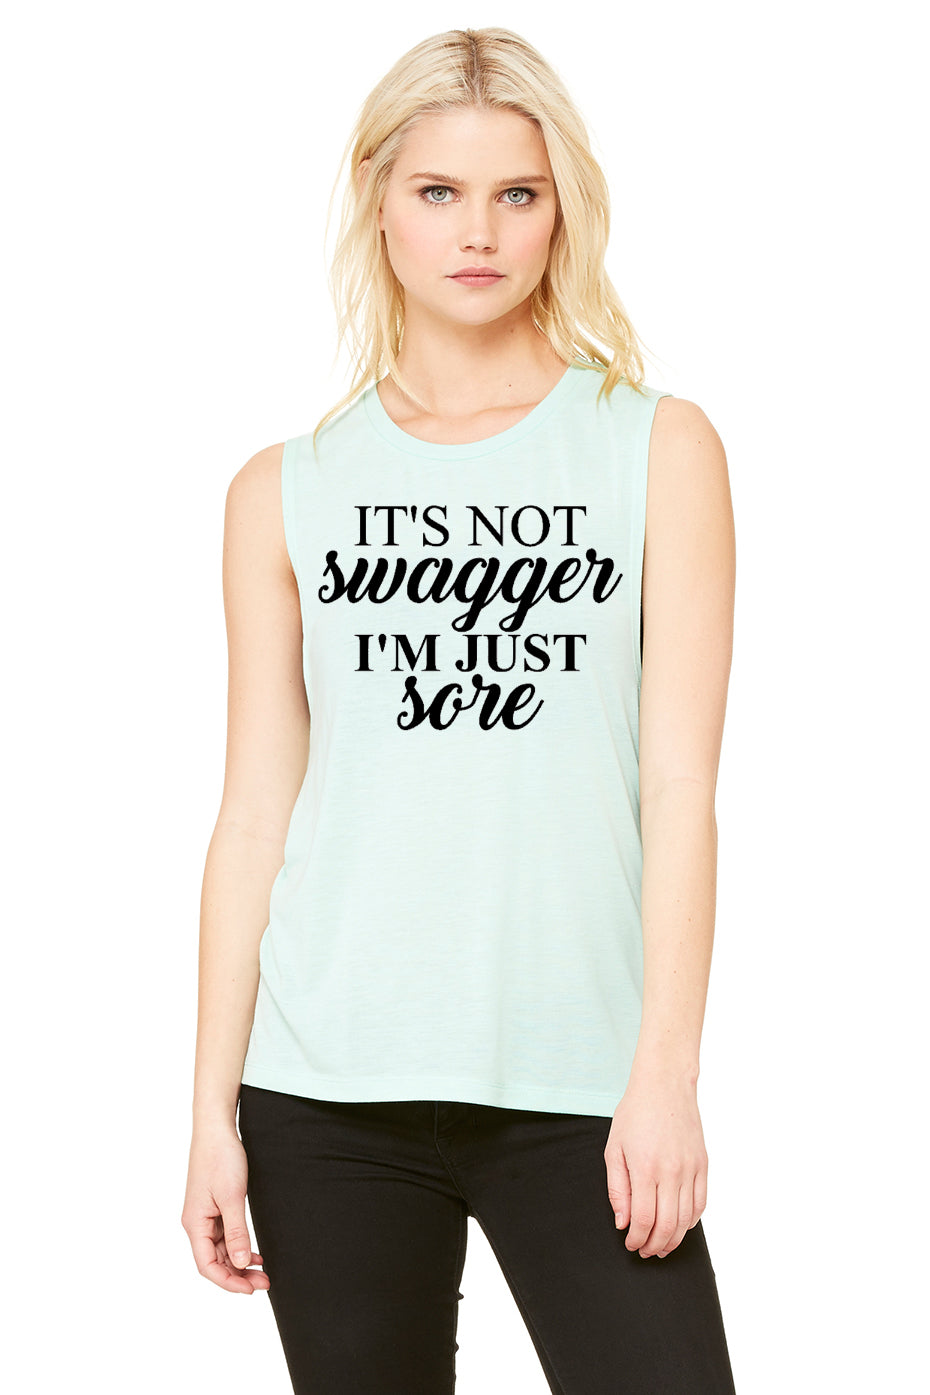 "It's Not Swagger I'm Just Sore" - Mint Muscle Tank (8803) - Southern Grace Creations